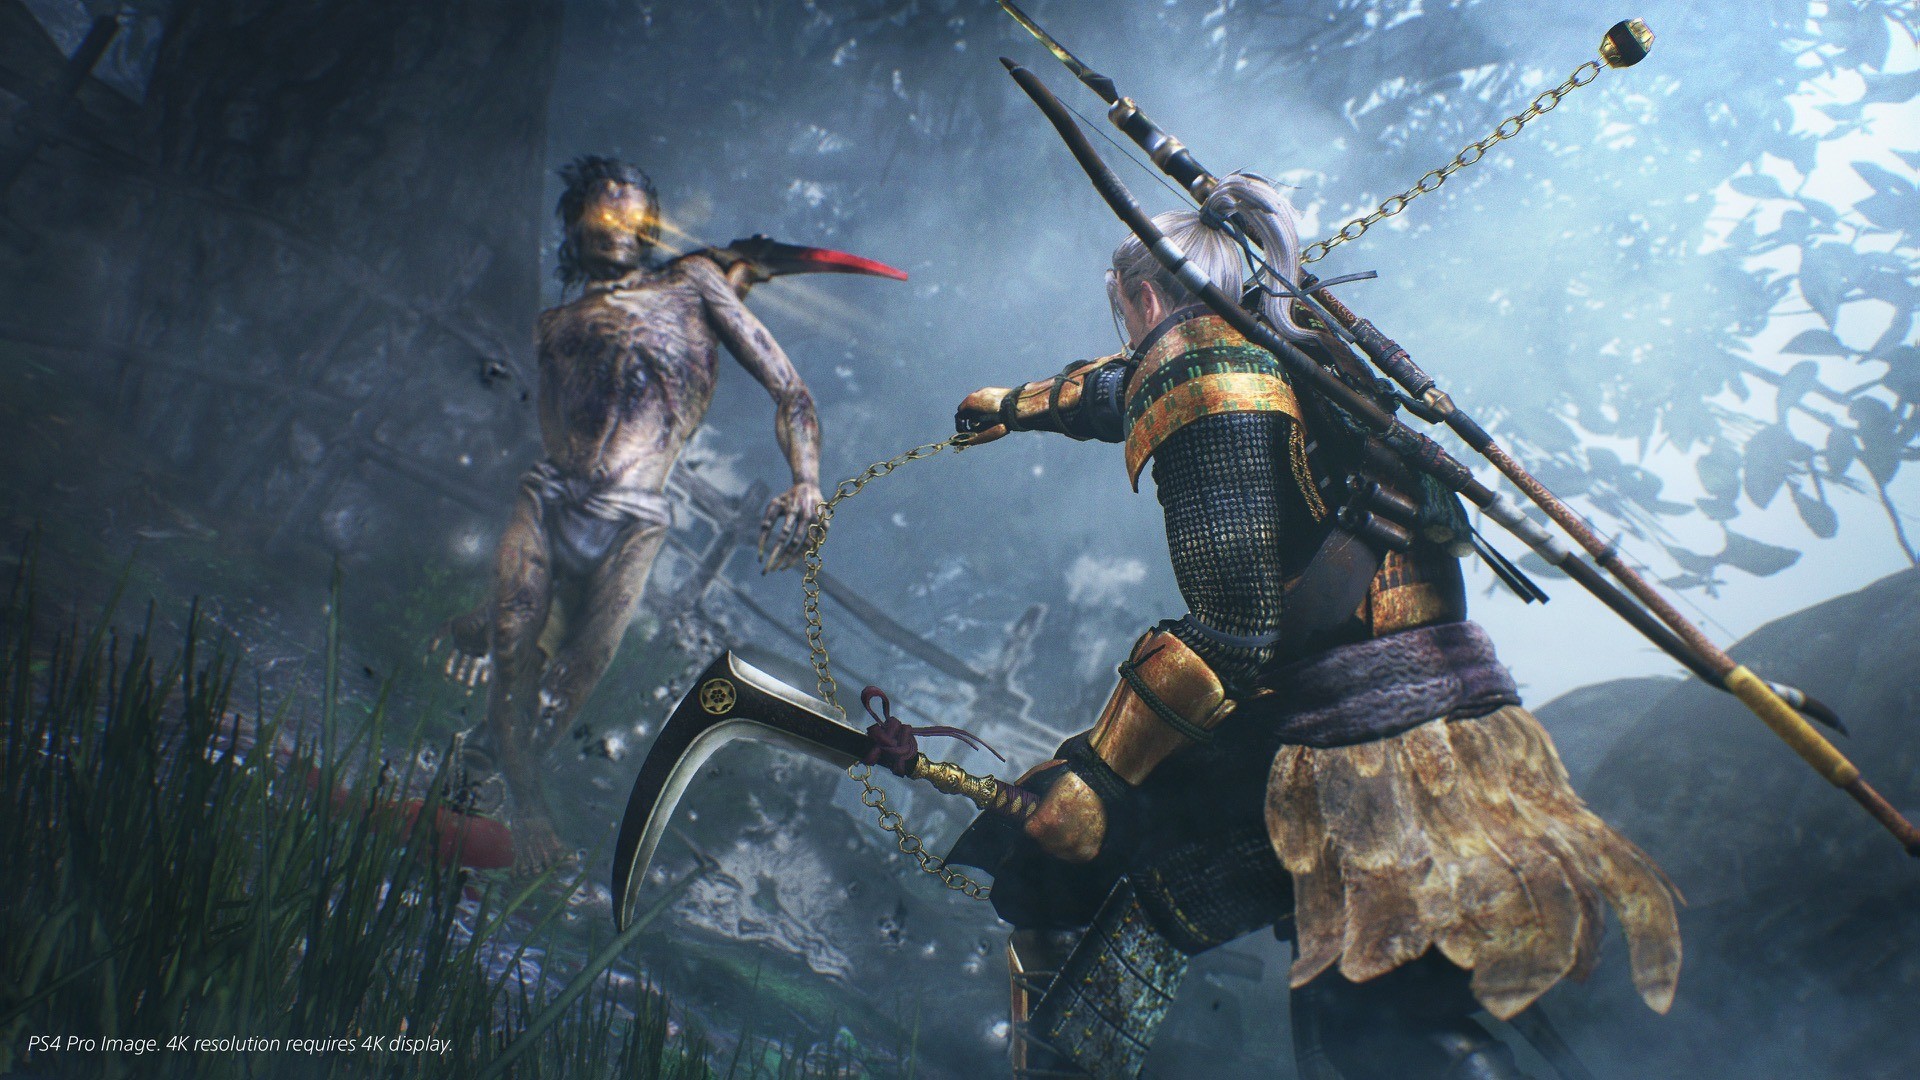 Hd Quality Wallpaper Collection Video Game 1920x1080 Nioh 1920x1080